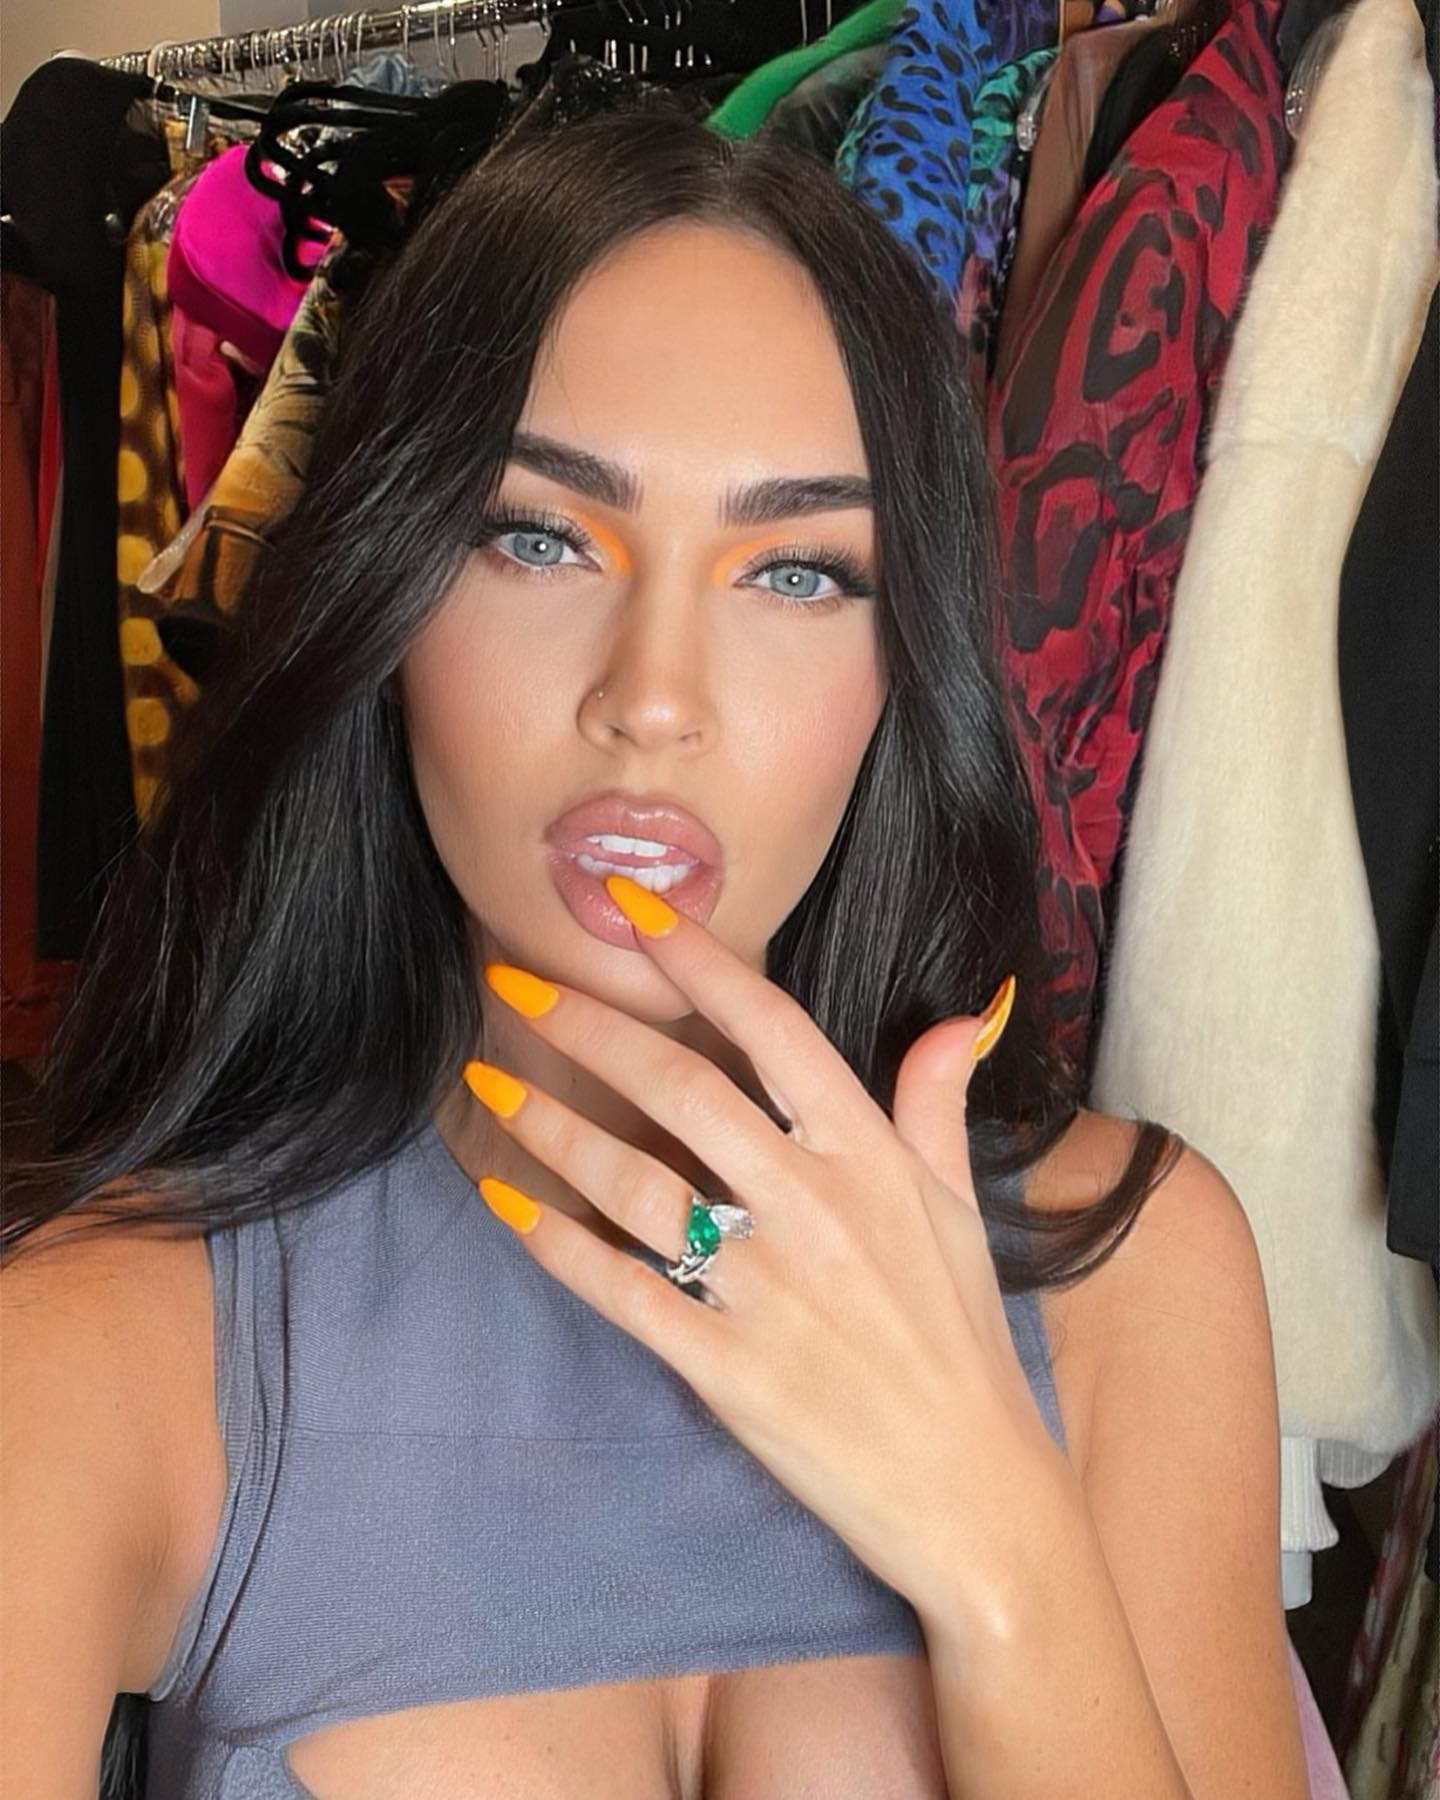 Megan Fox Spiked Engagement Ring From Machine Gun Kelly, Does It Hurt?